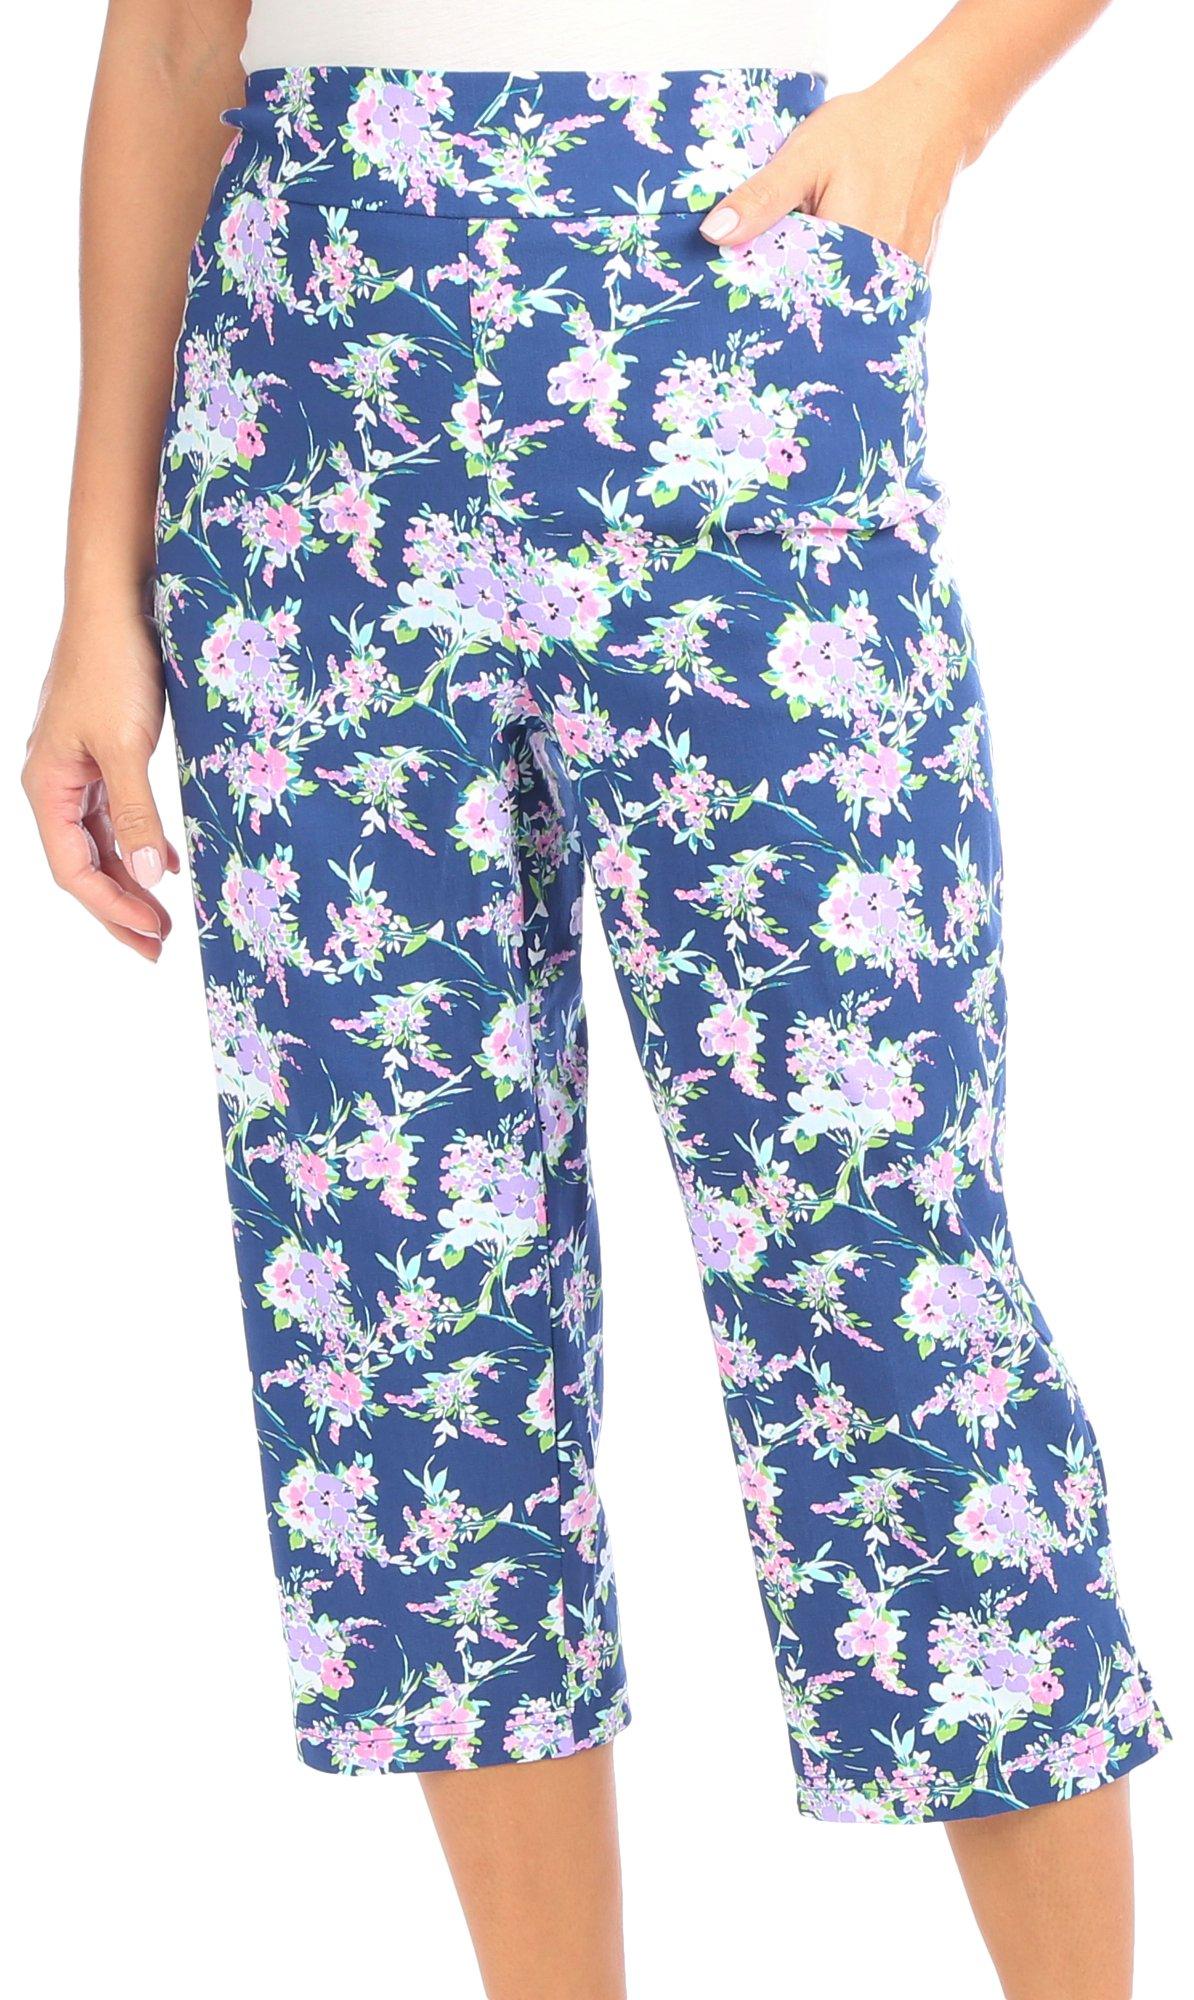 Coral Bay Womens Floral Pull On Capris